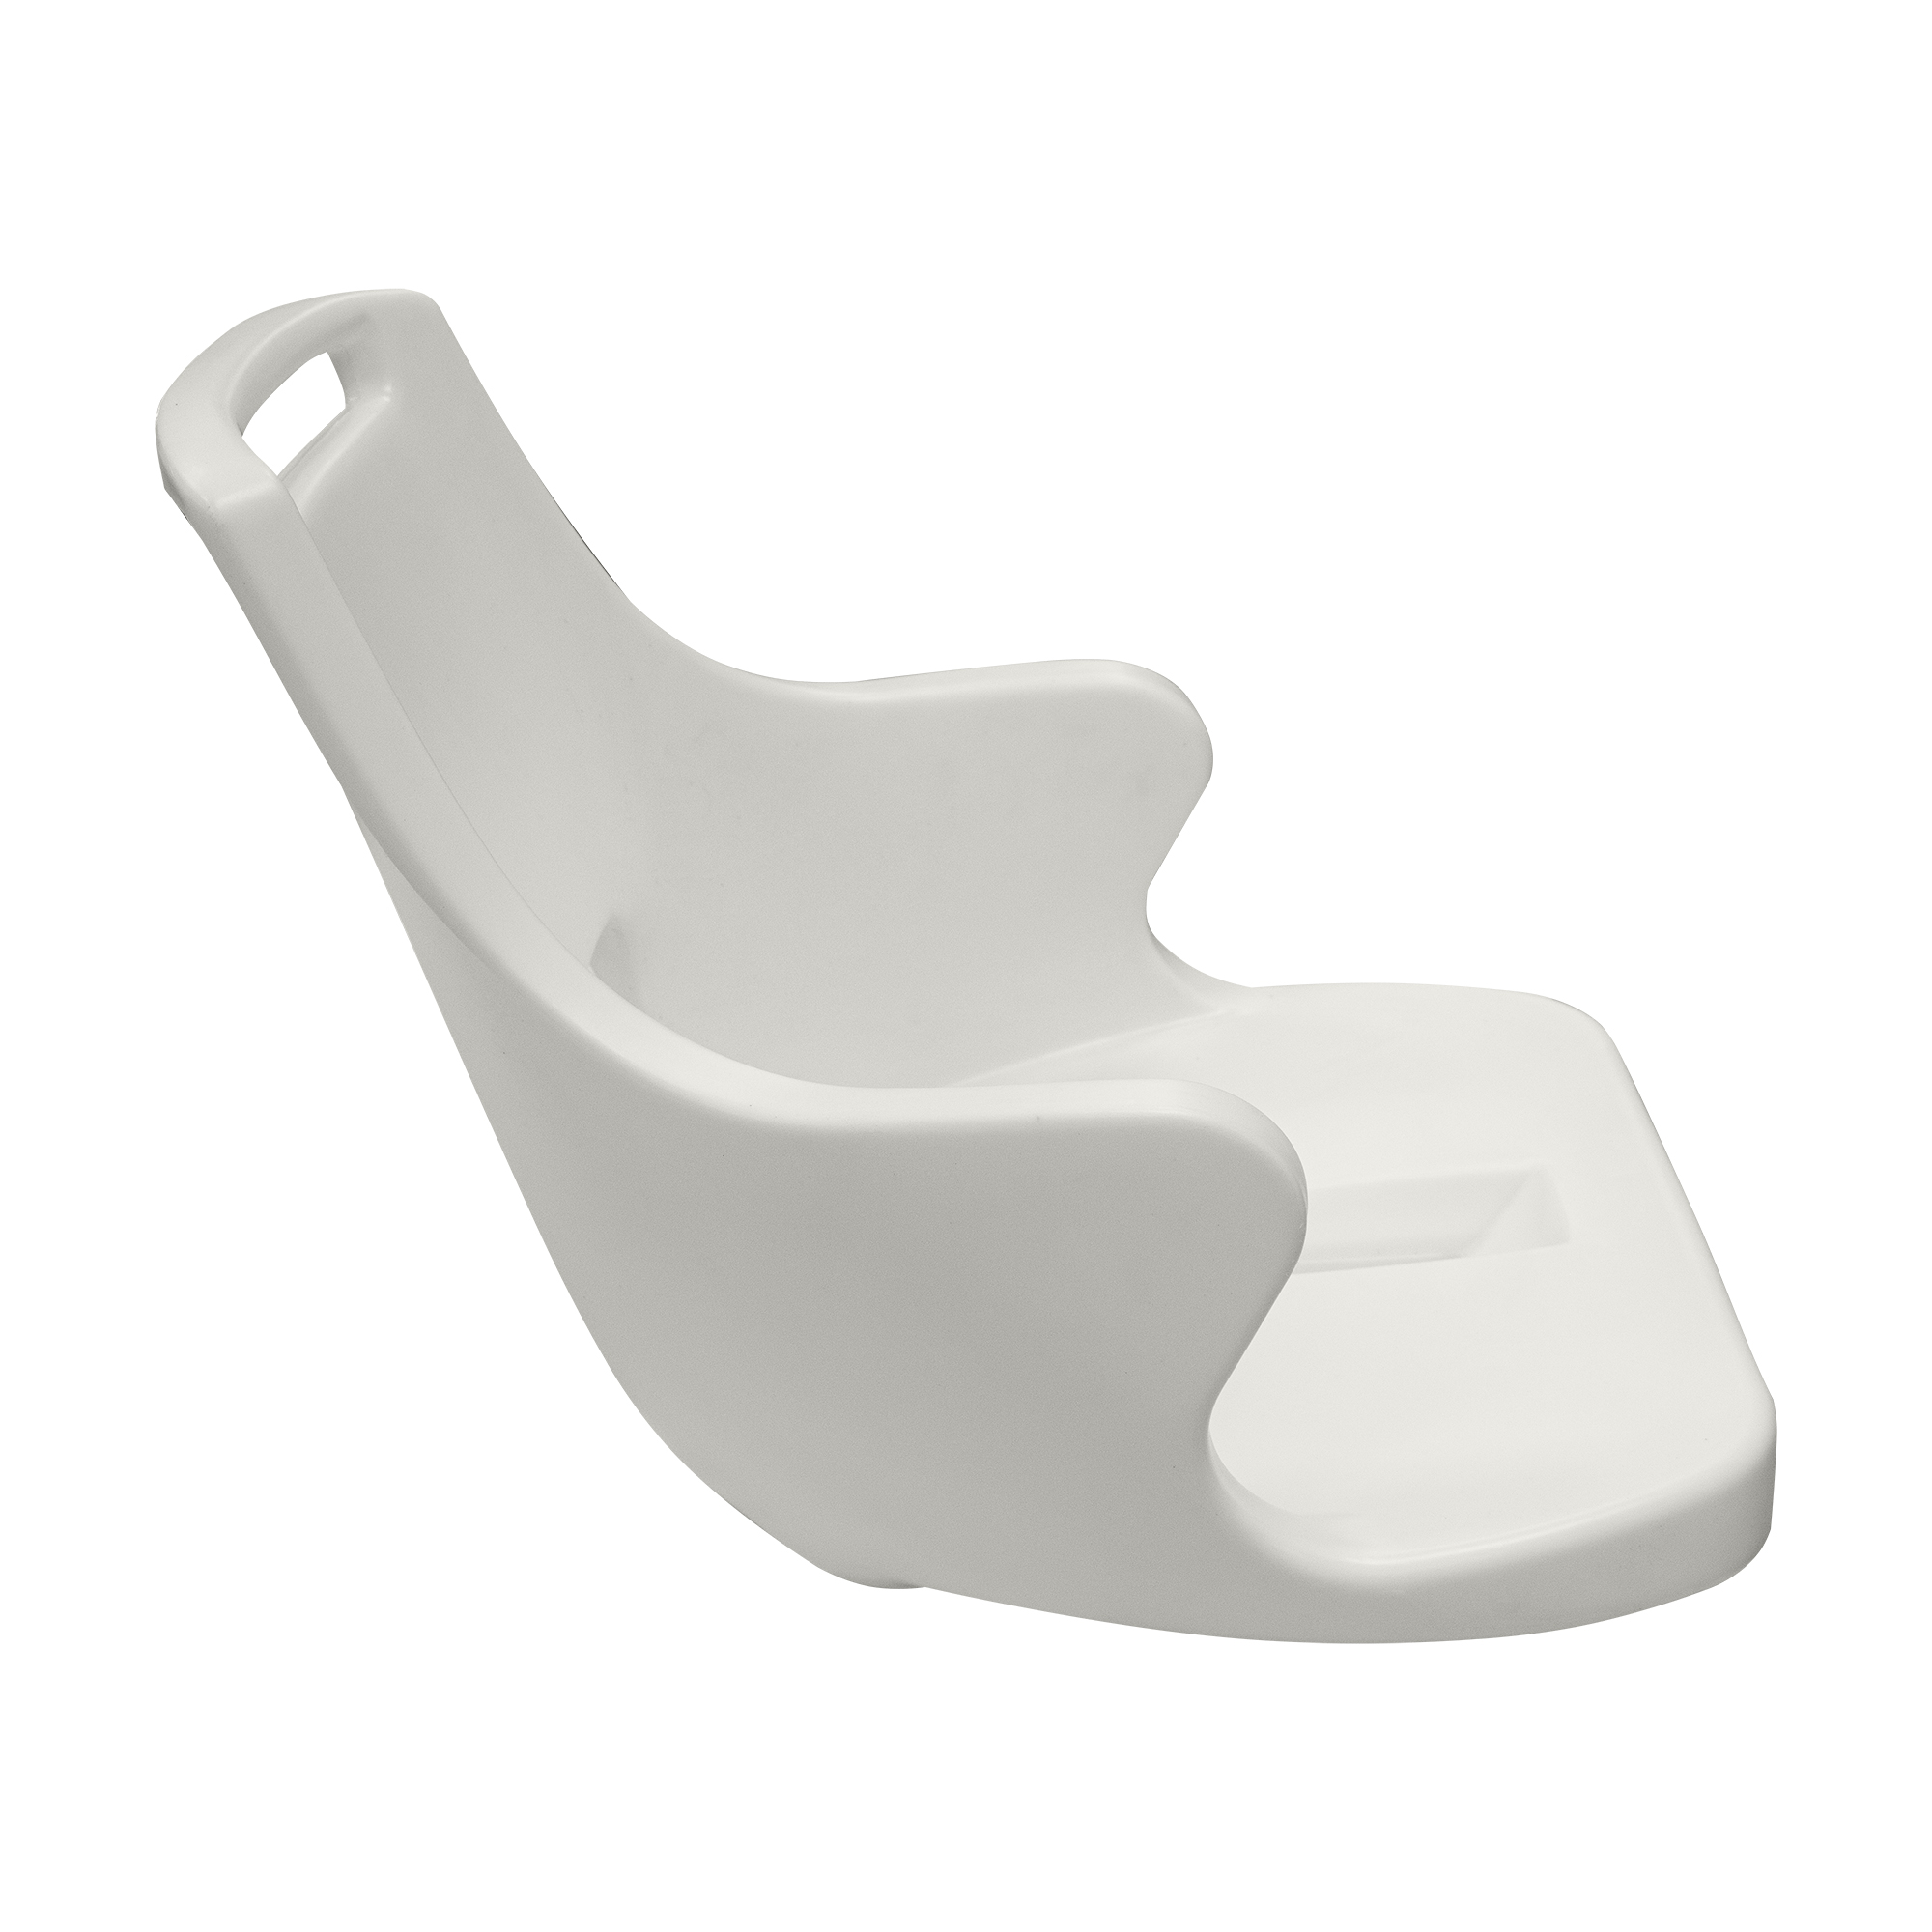 Wise 8WD015-1-710 Standard Pilot Chair with Arm Rests, Rotomolded Shell Only - image 3 of 6